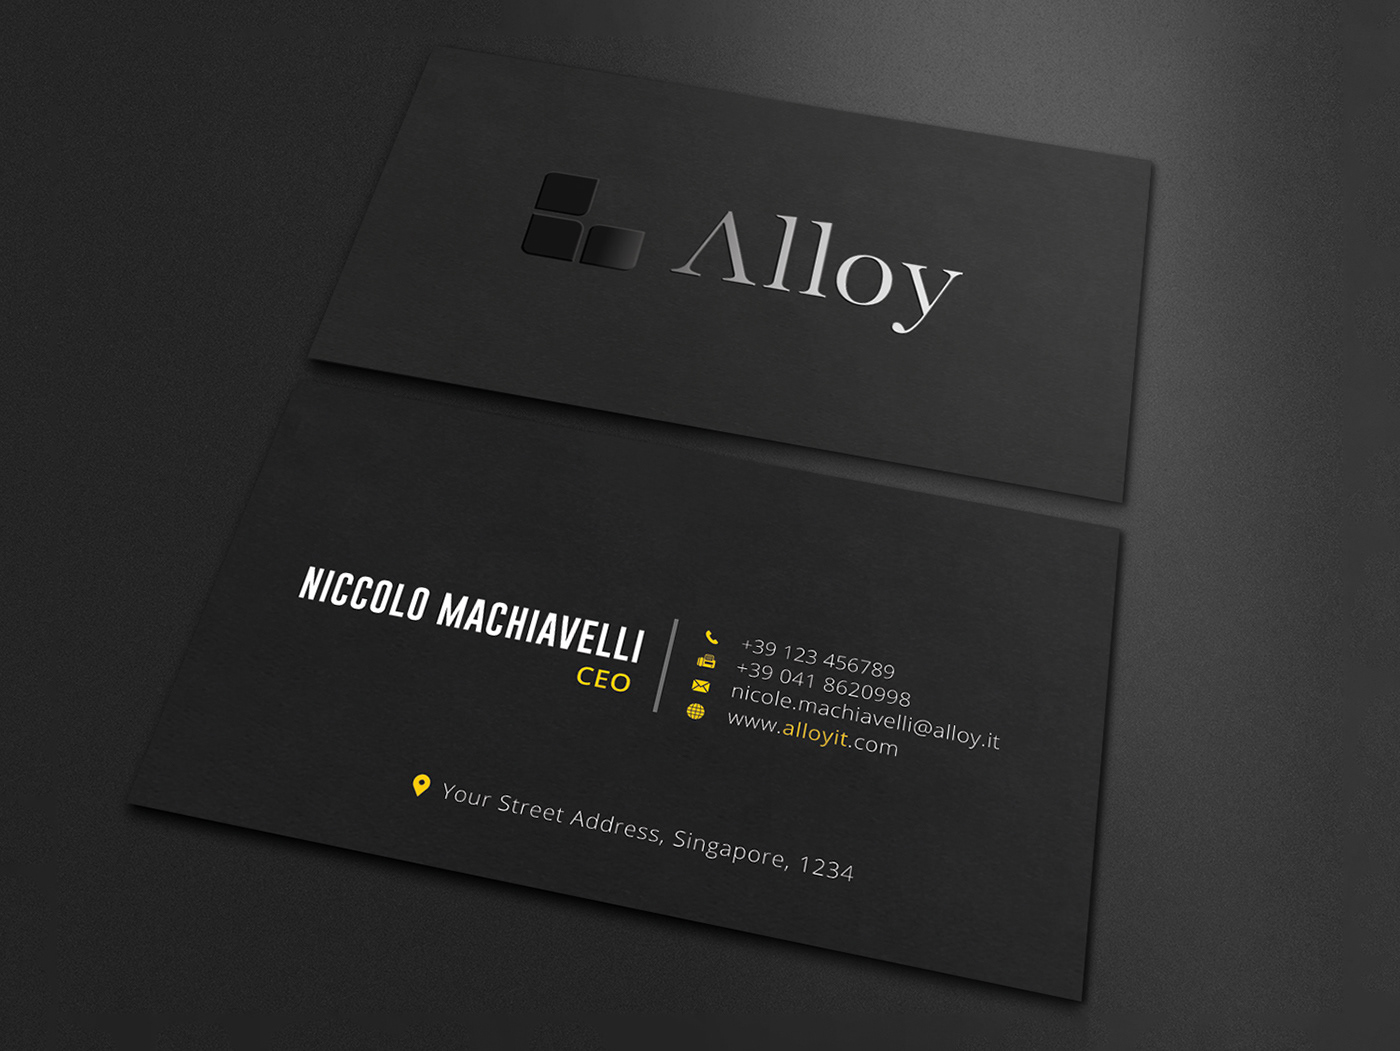 Business Card Mockup PSD file Free Download Vol.1 on Behance